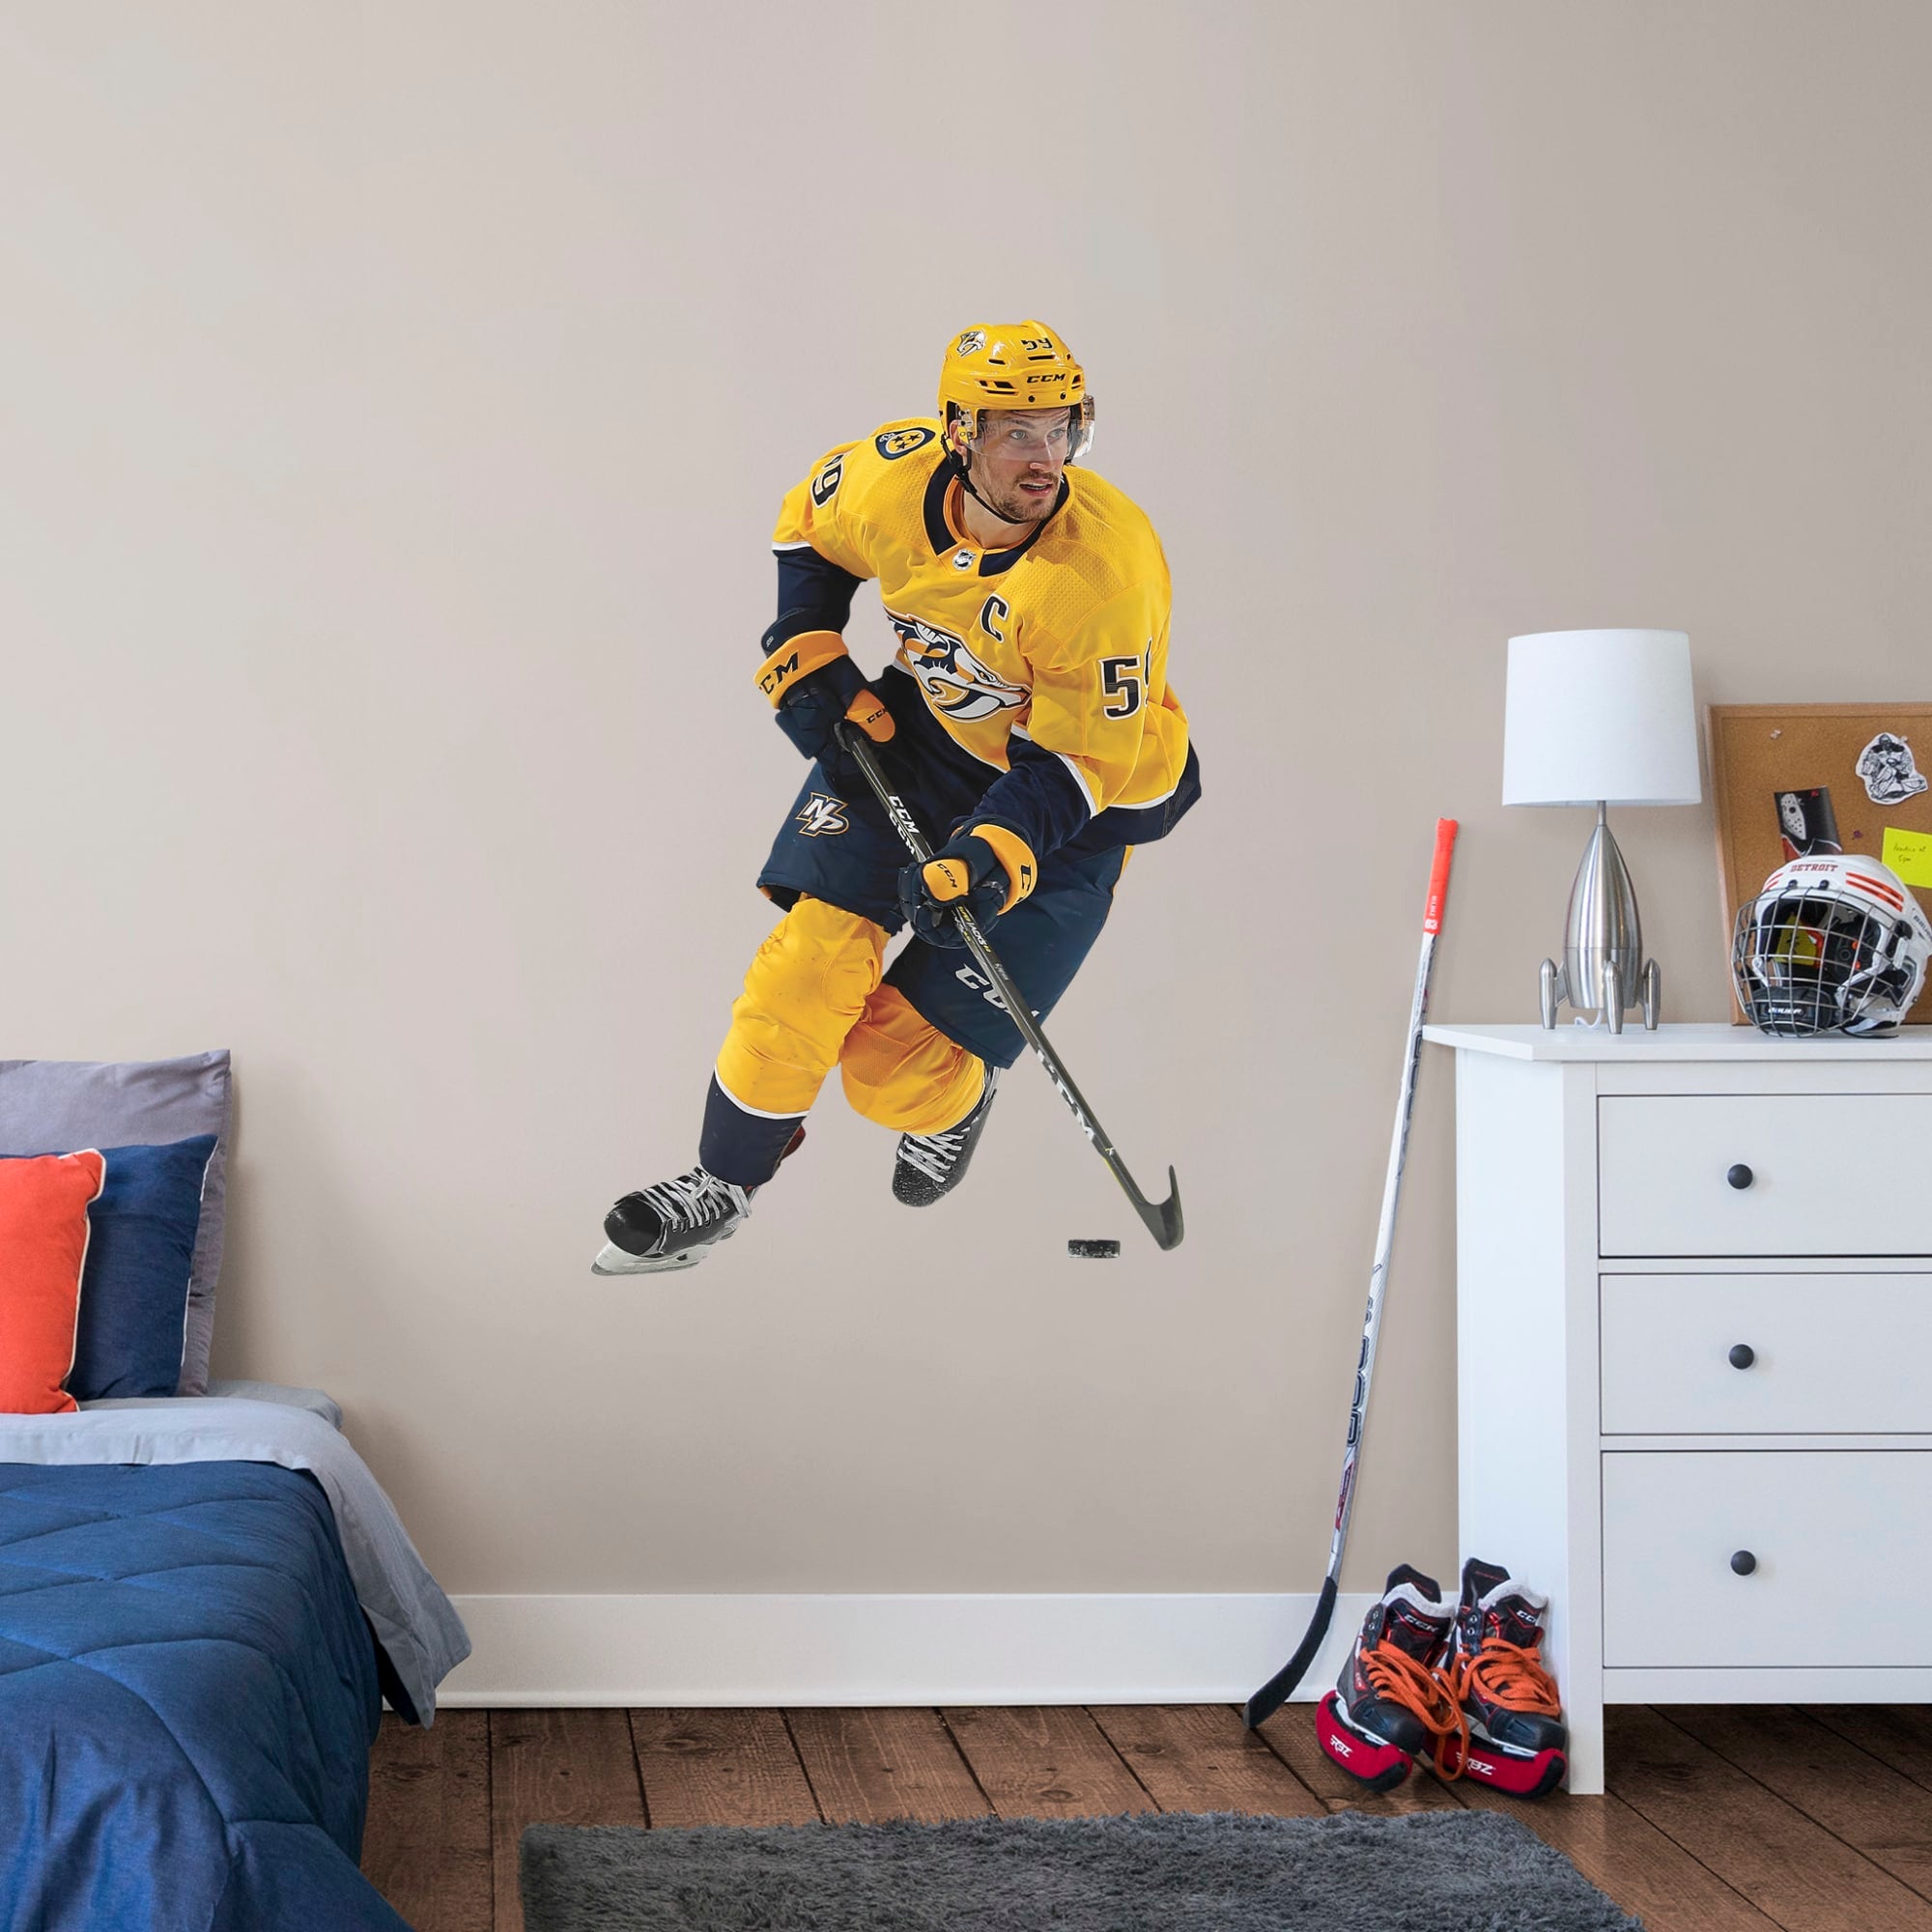 Roman Josi for Nashville Predators - Officially Licensed NHL Removable Wall Decal Giant Athlete + 2 Decals (33"W x 51"H) by Fath